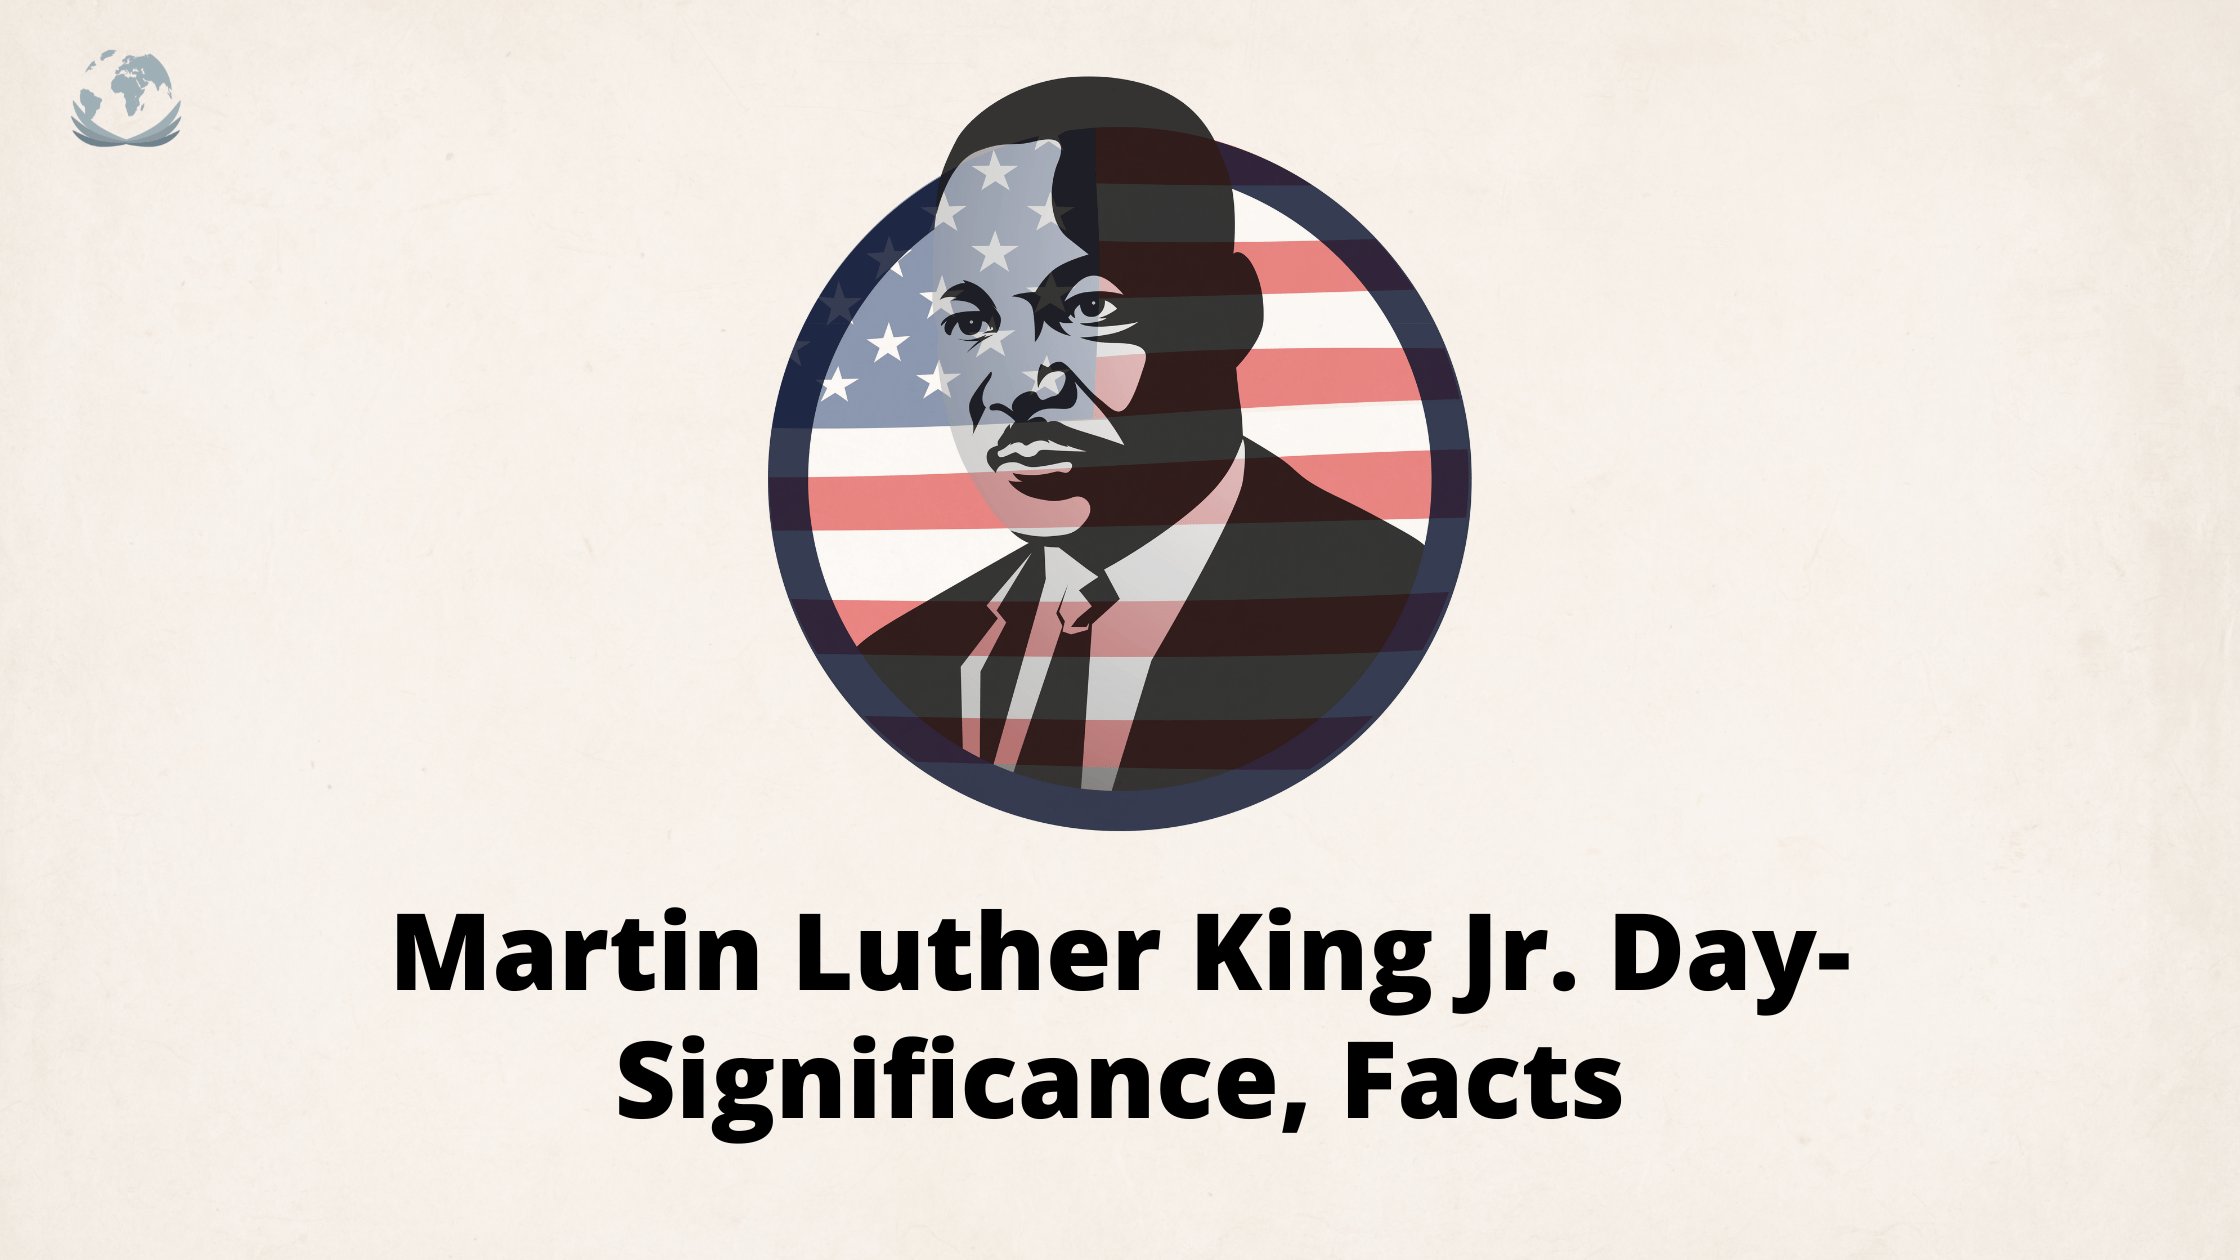 Martin Luther King Jr. Day- Significance and Facts